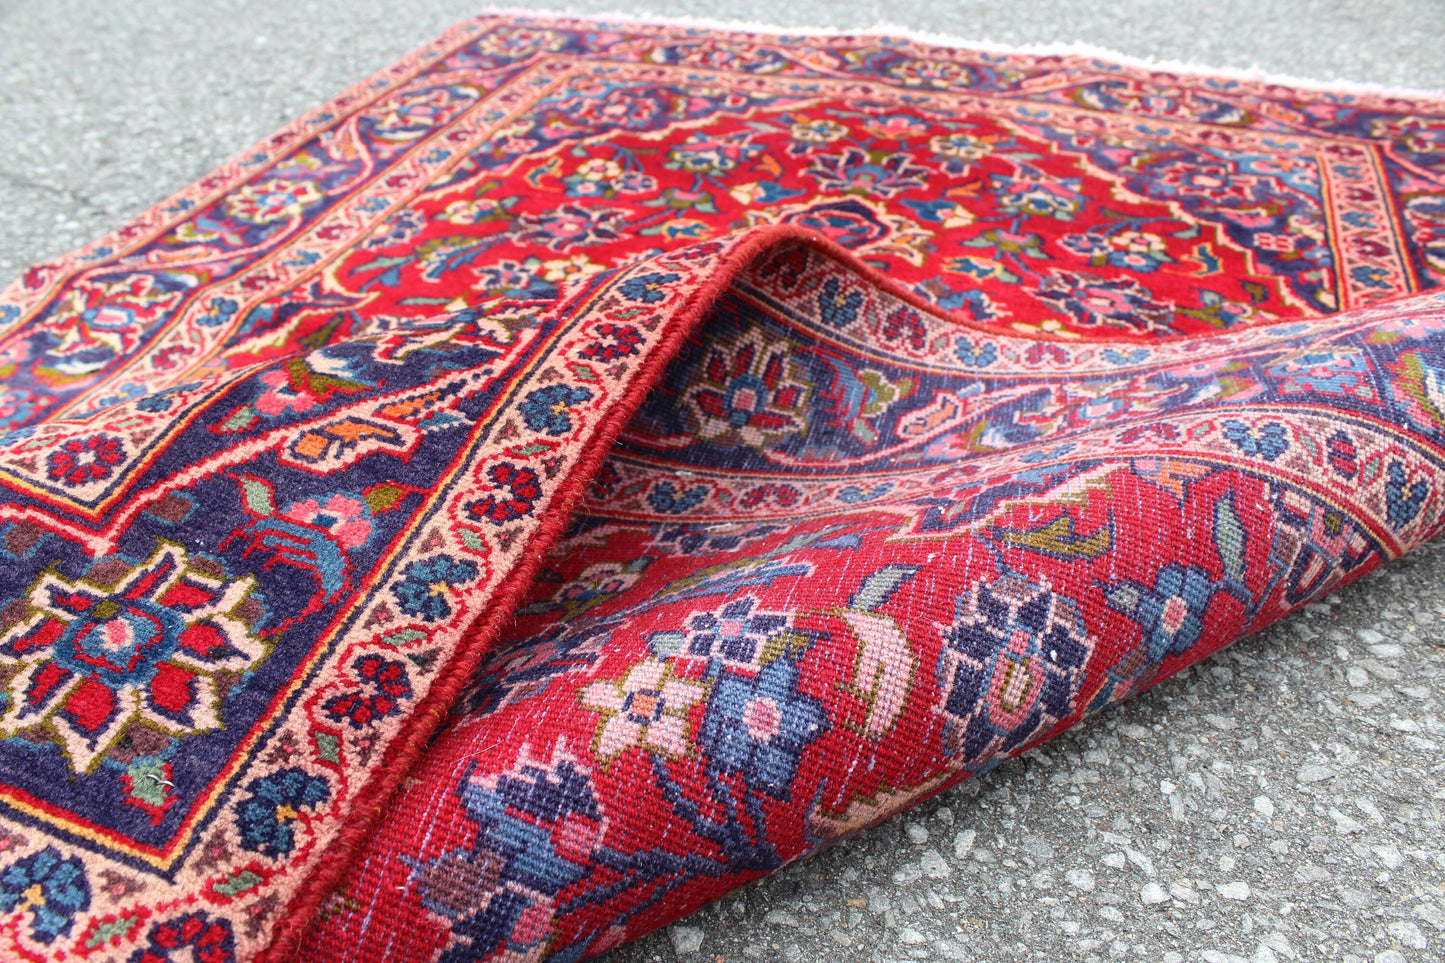 Red Oriental 3'3" x 4'9" Medallion Area rug with Blue Border